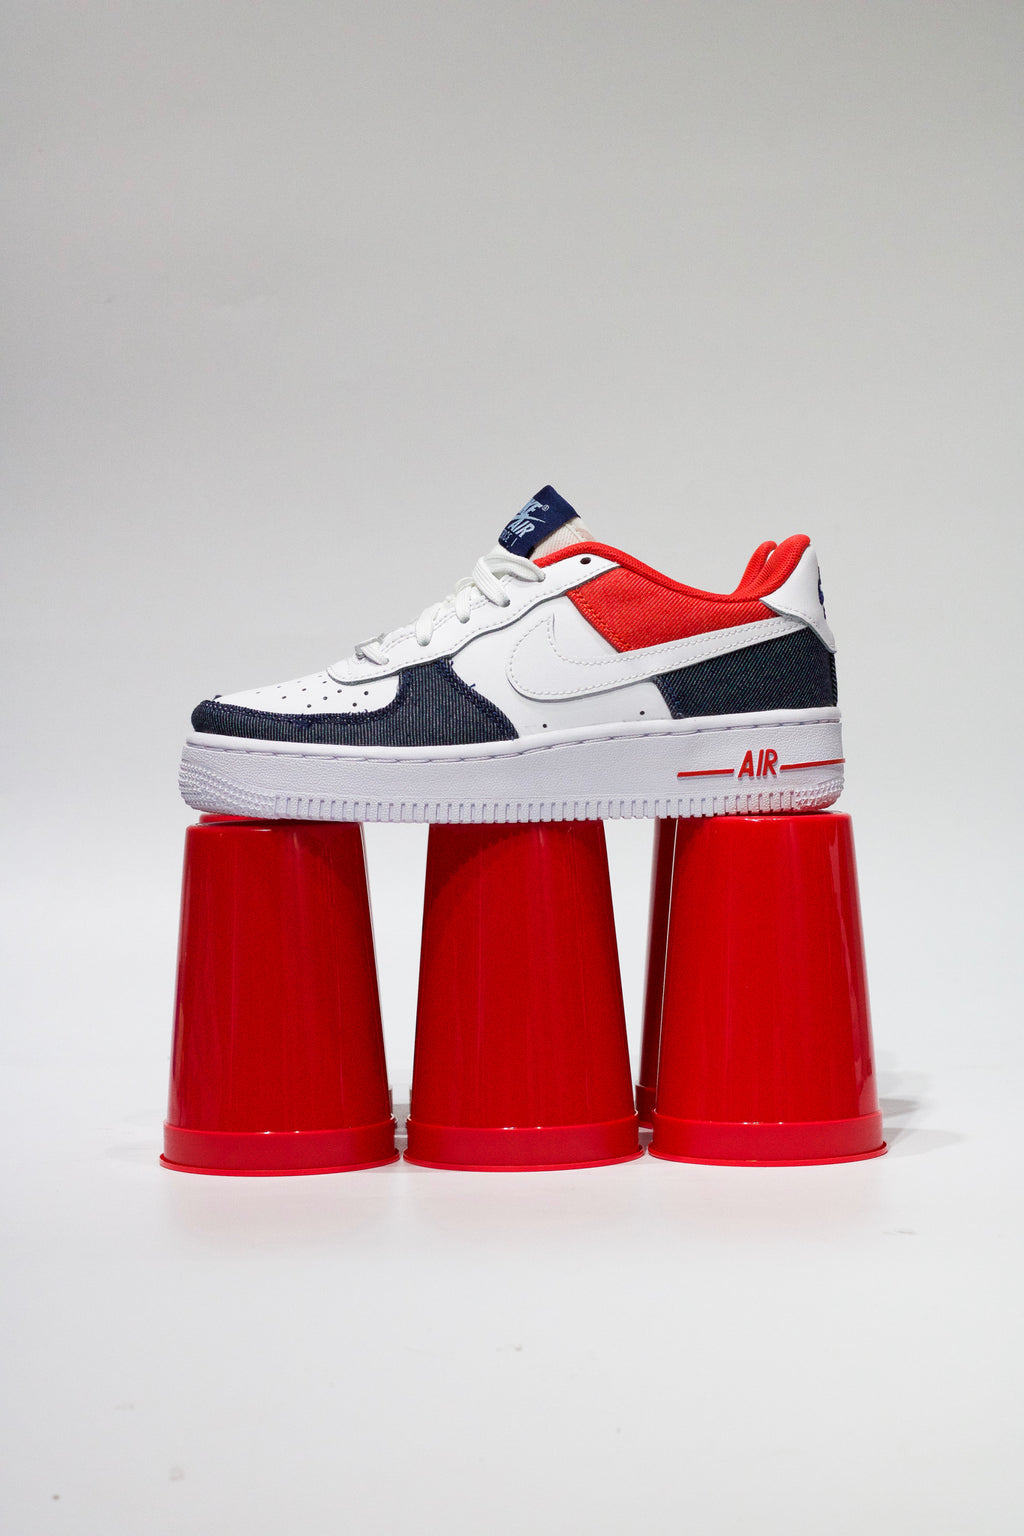  Nike Youth Air Force 1 LV8 (GS) DJ5180 100 - Size 5Y